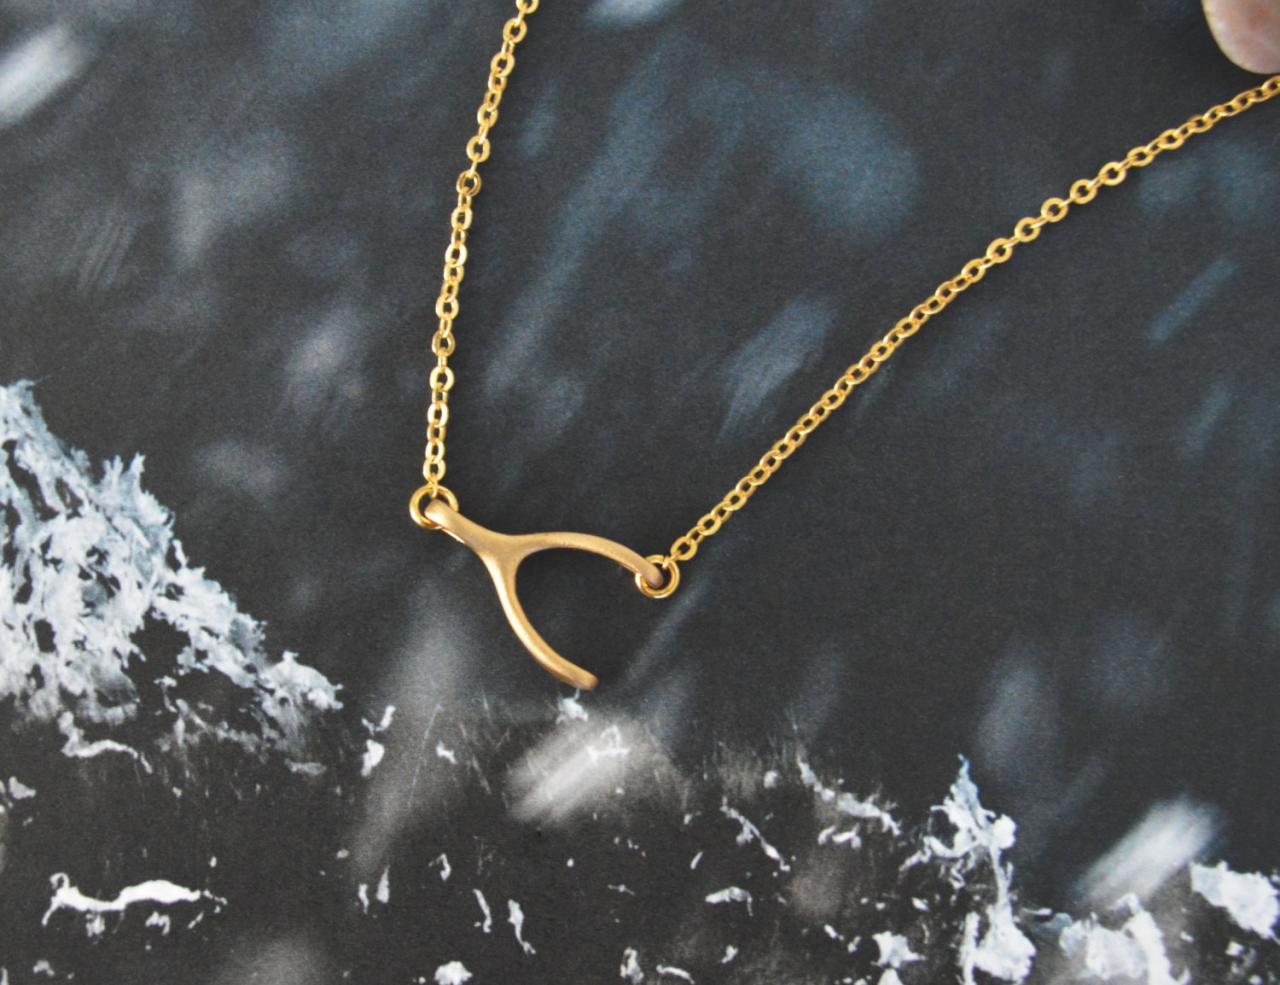 A-010 Wishbone Necklace, Simple Necklace, Modern Necklace, Pendant Necklace, Gold Plated Chain/bridesmaid/gifts/everyday Jewelry/